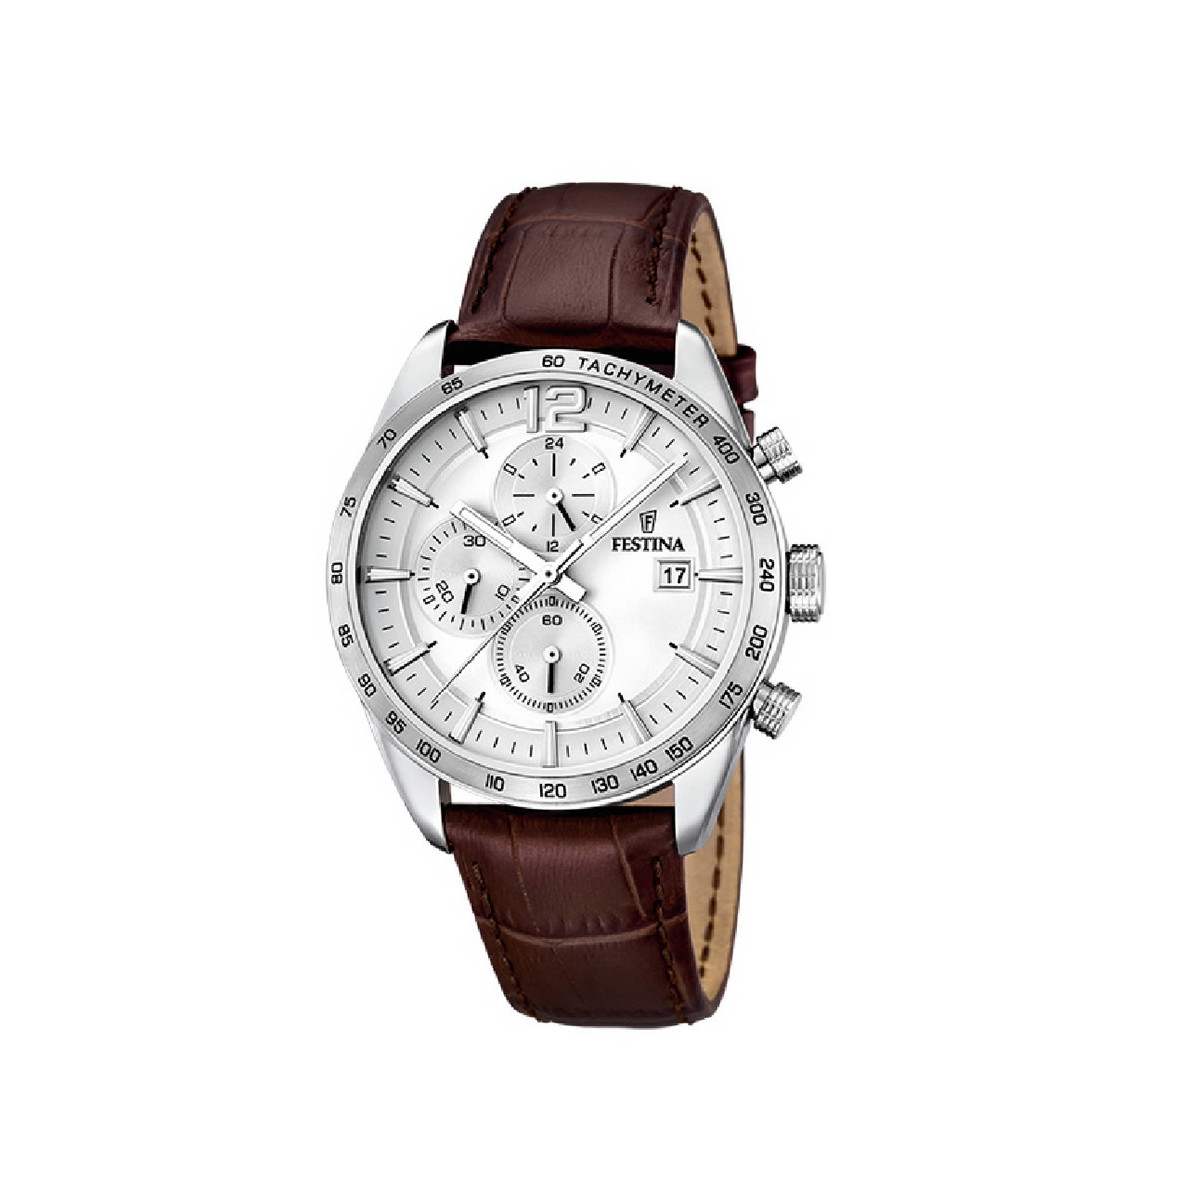 FESTINA CHRONOGRAPH WITH LEATHER STRAP